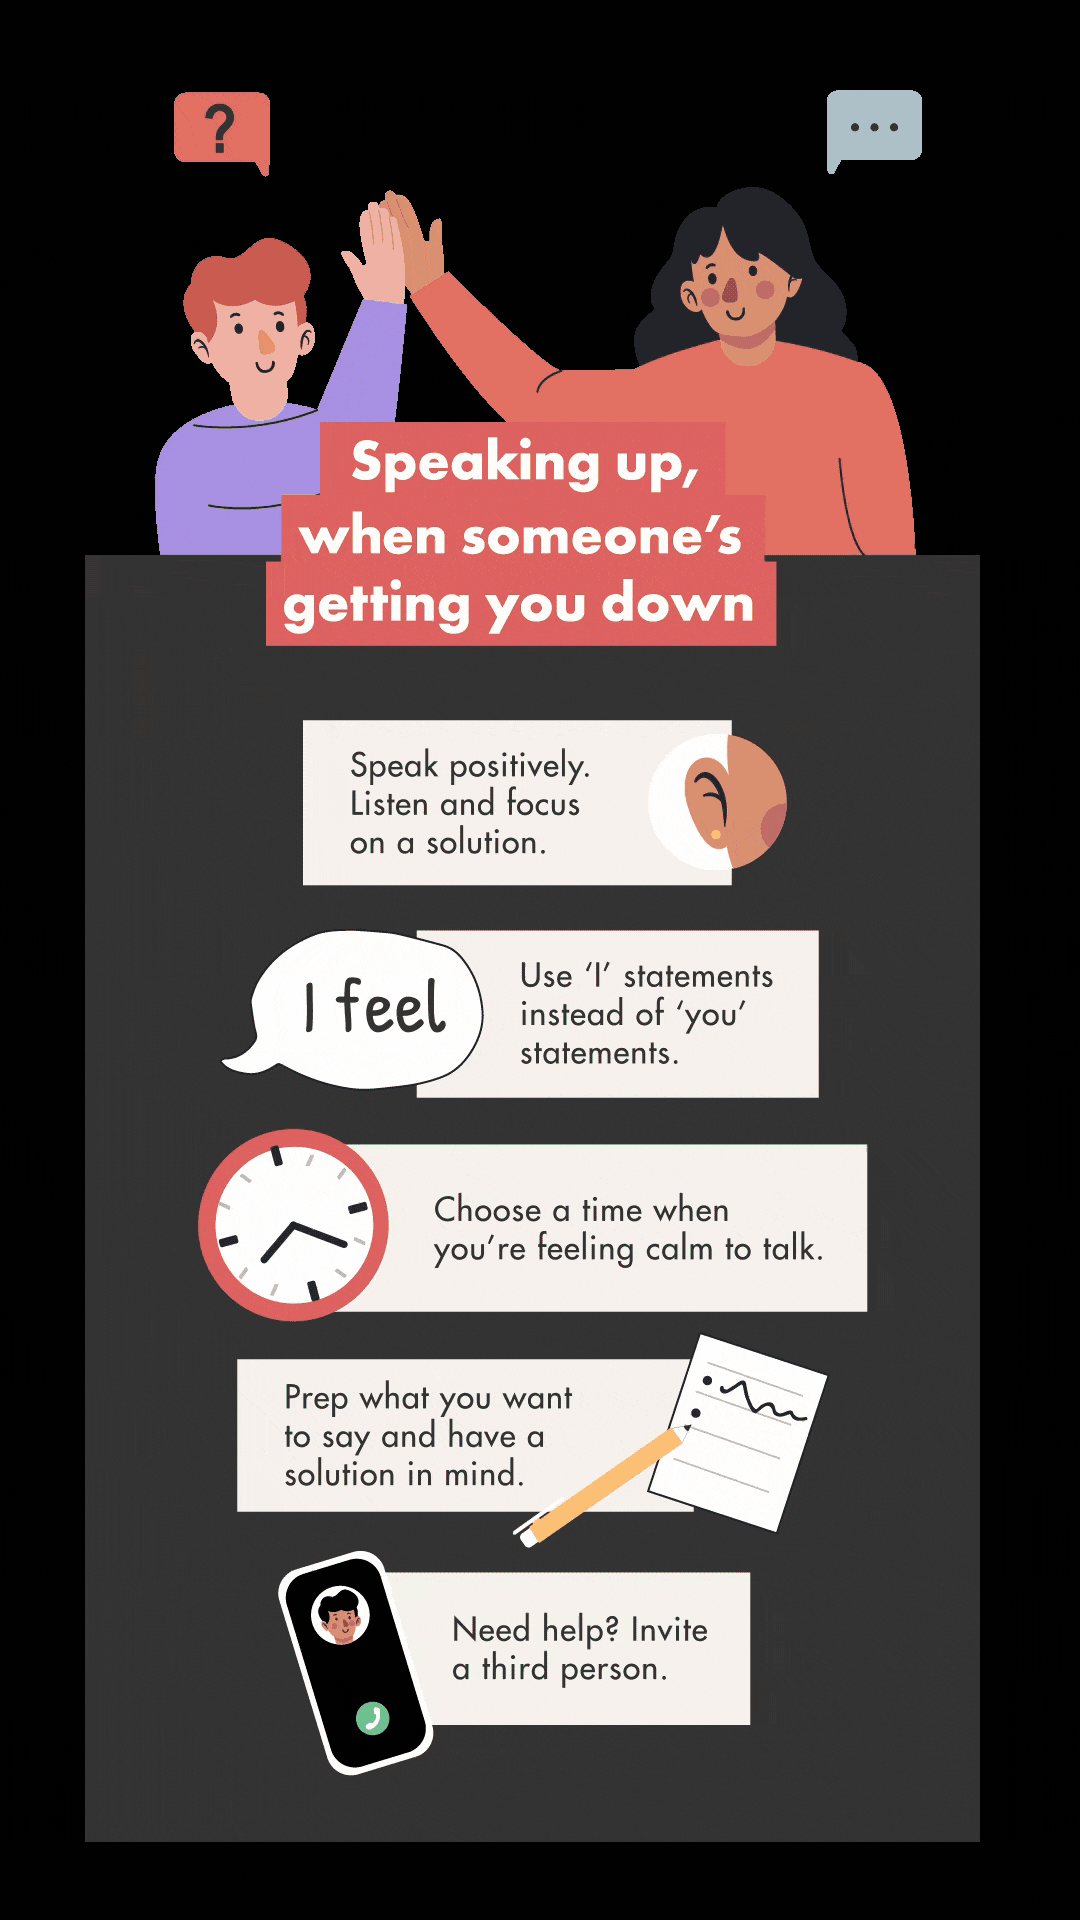 Infographic about speaking up when someone's getting you down